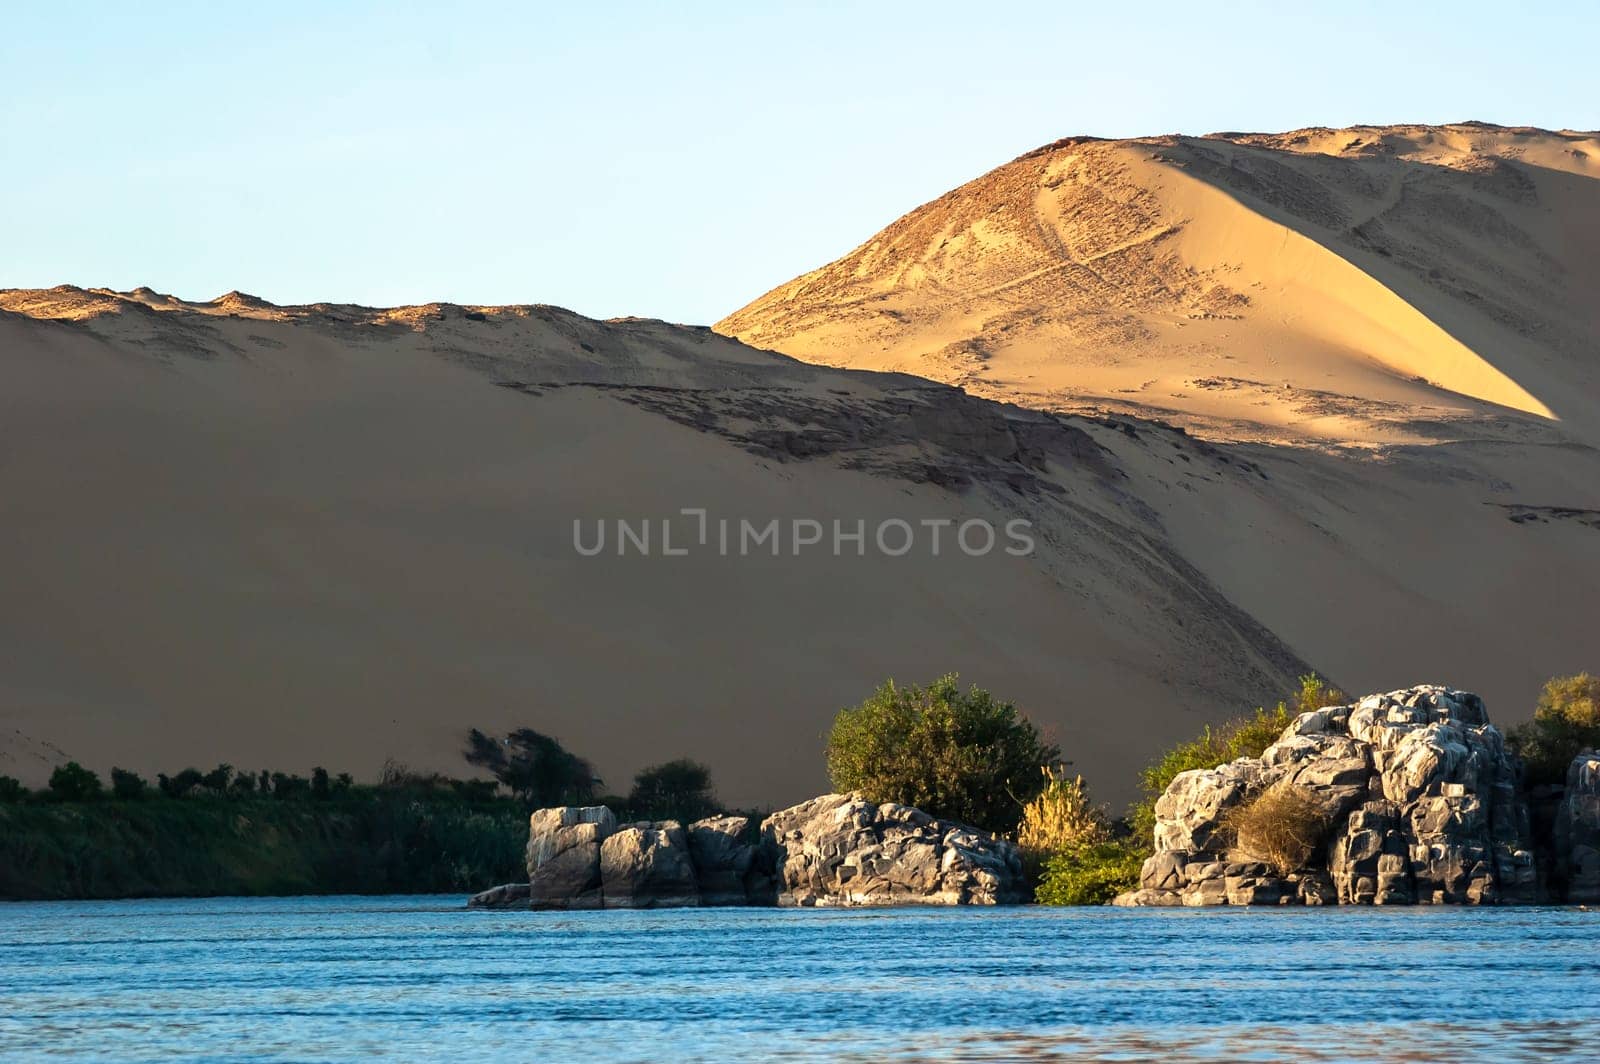 Abu Simbel, Aswan, Egypt - April 18 2008: the river Nile and the sand dunes in the background